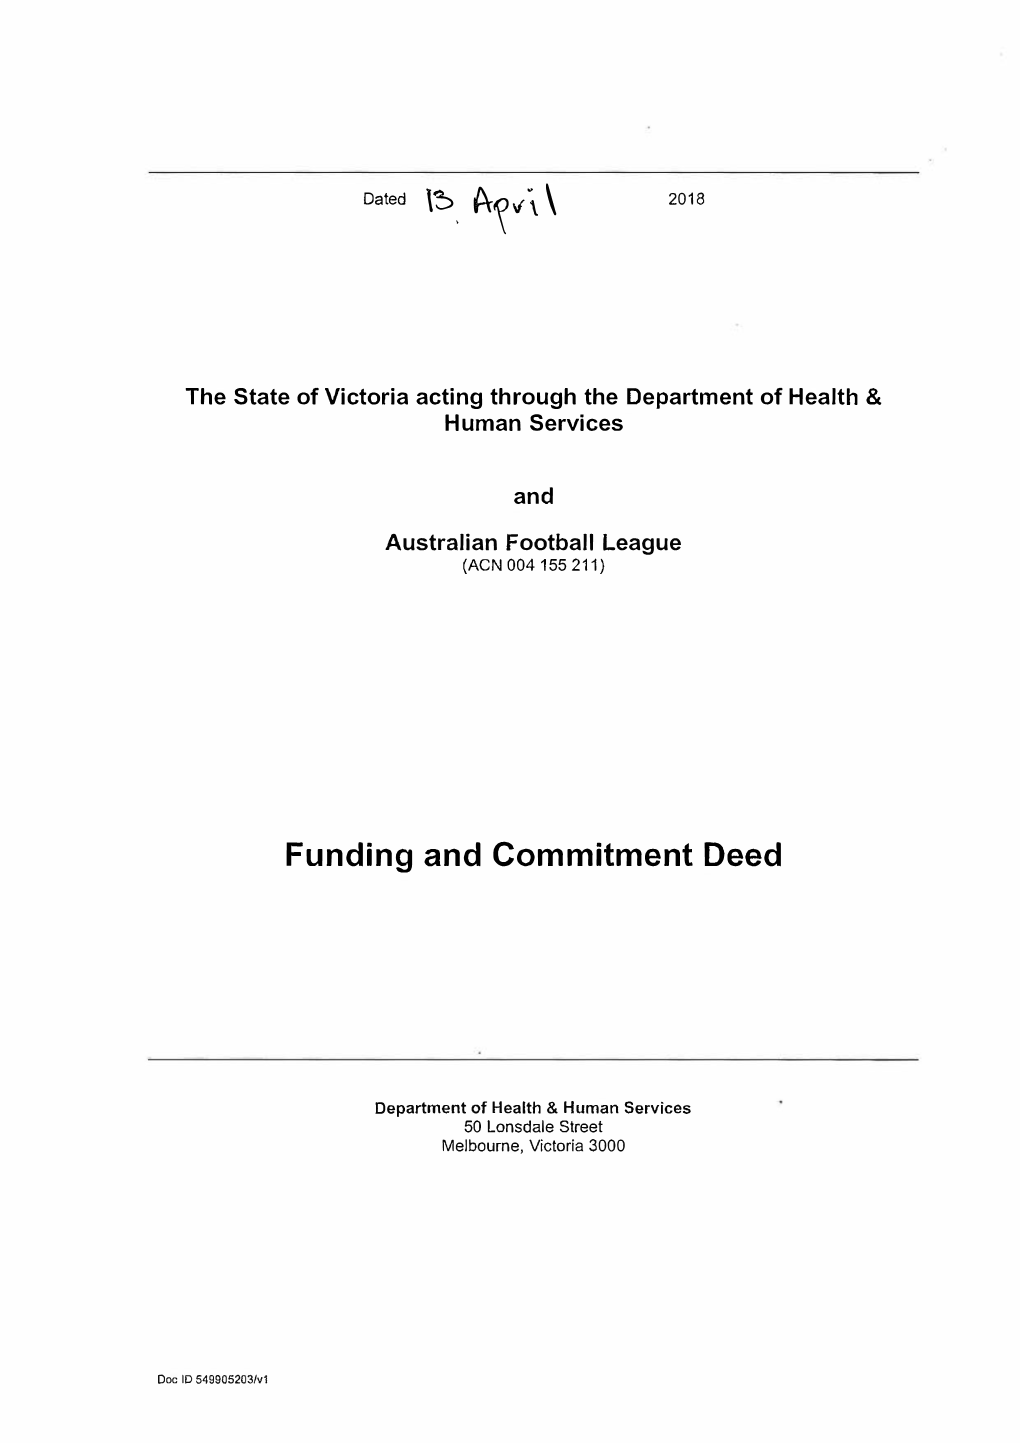 Funding and Commitment Deed